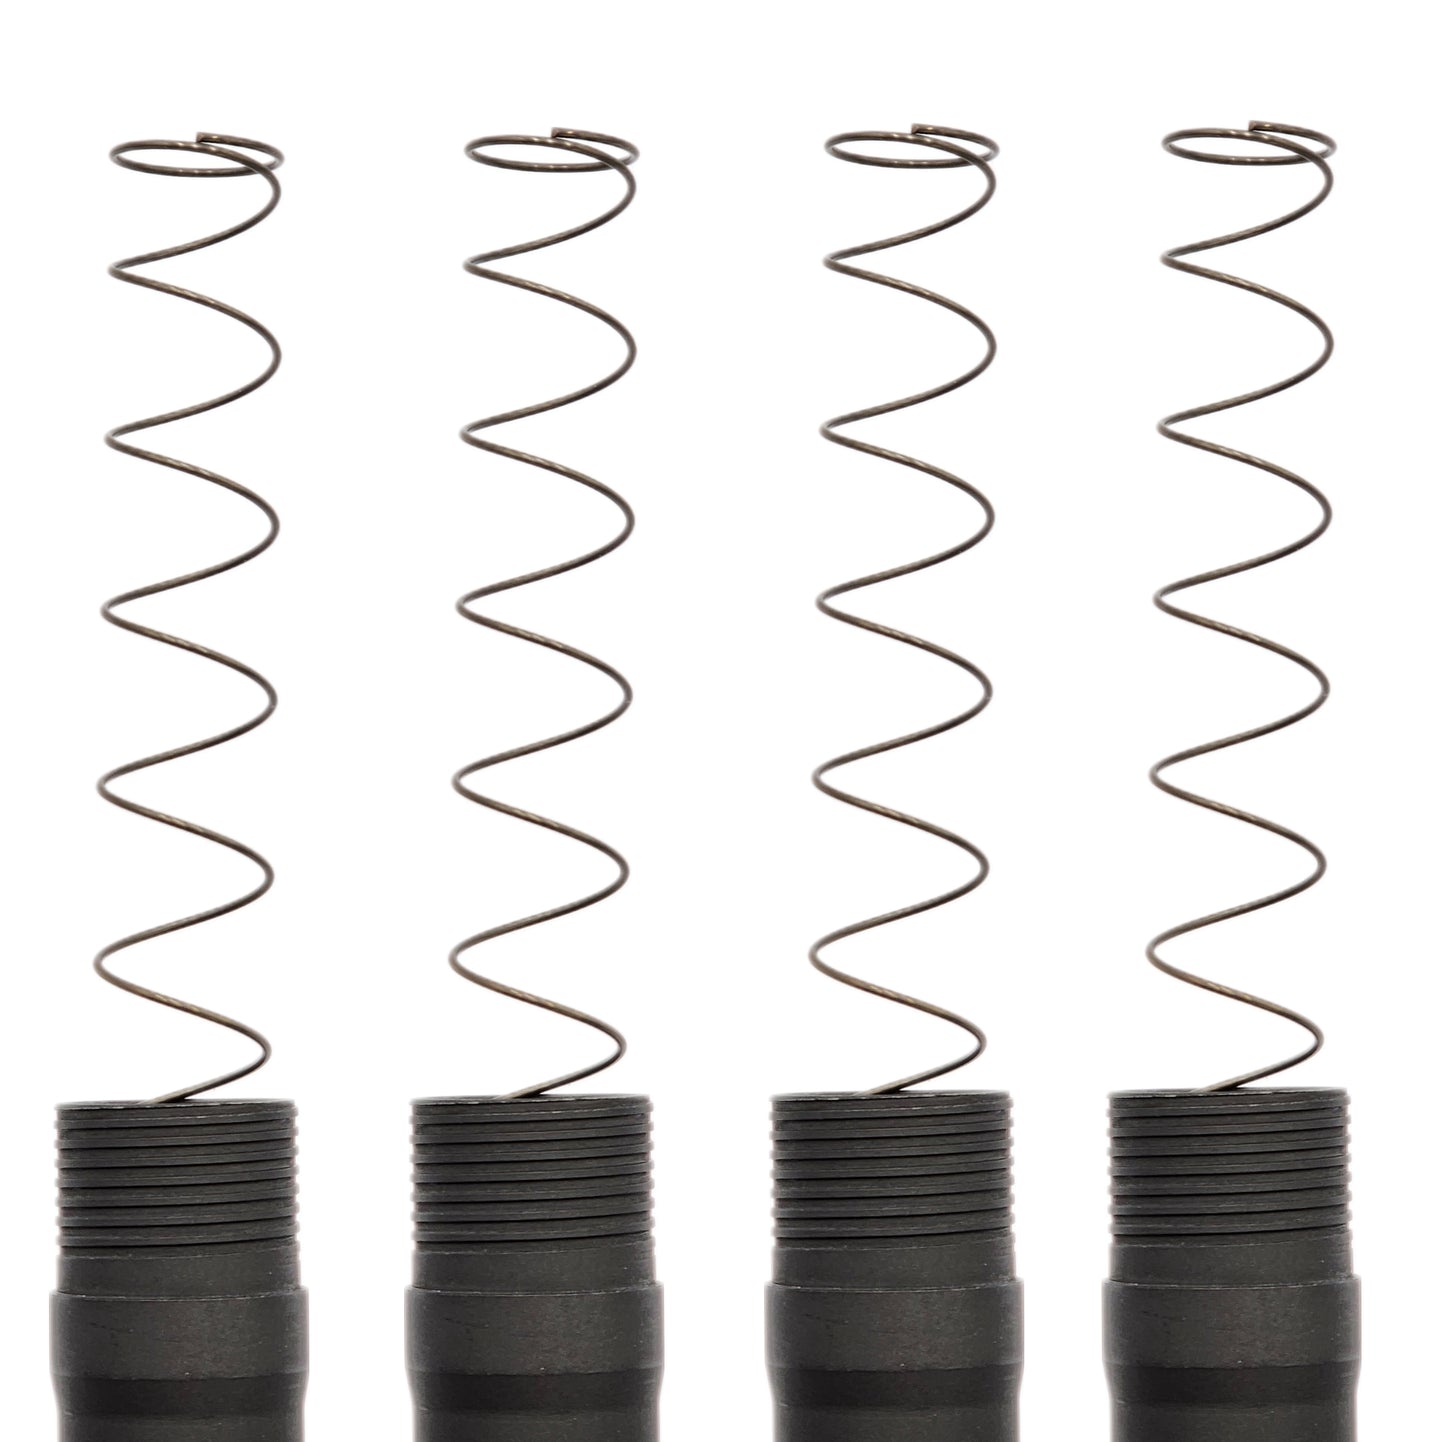 Benelli M4 Wolff Magazine Springs 4-pack